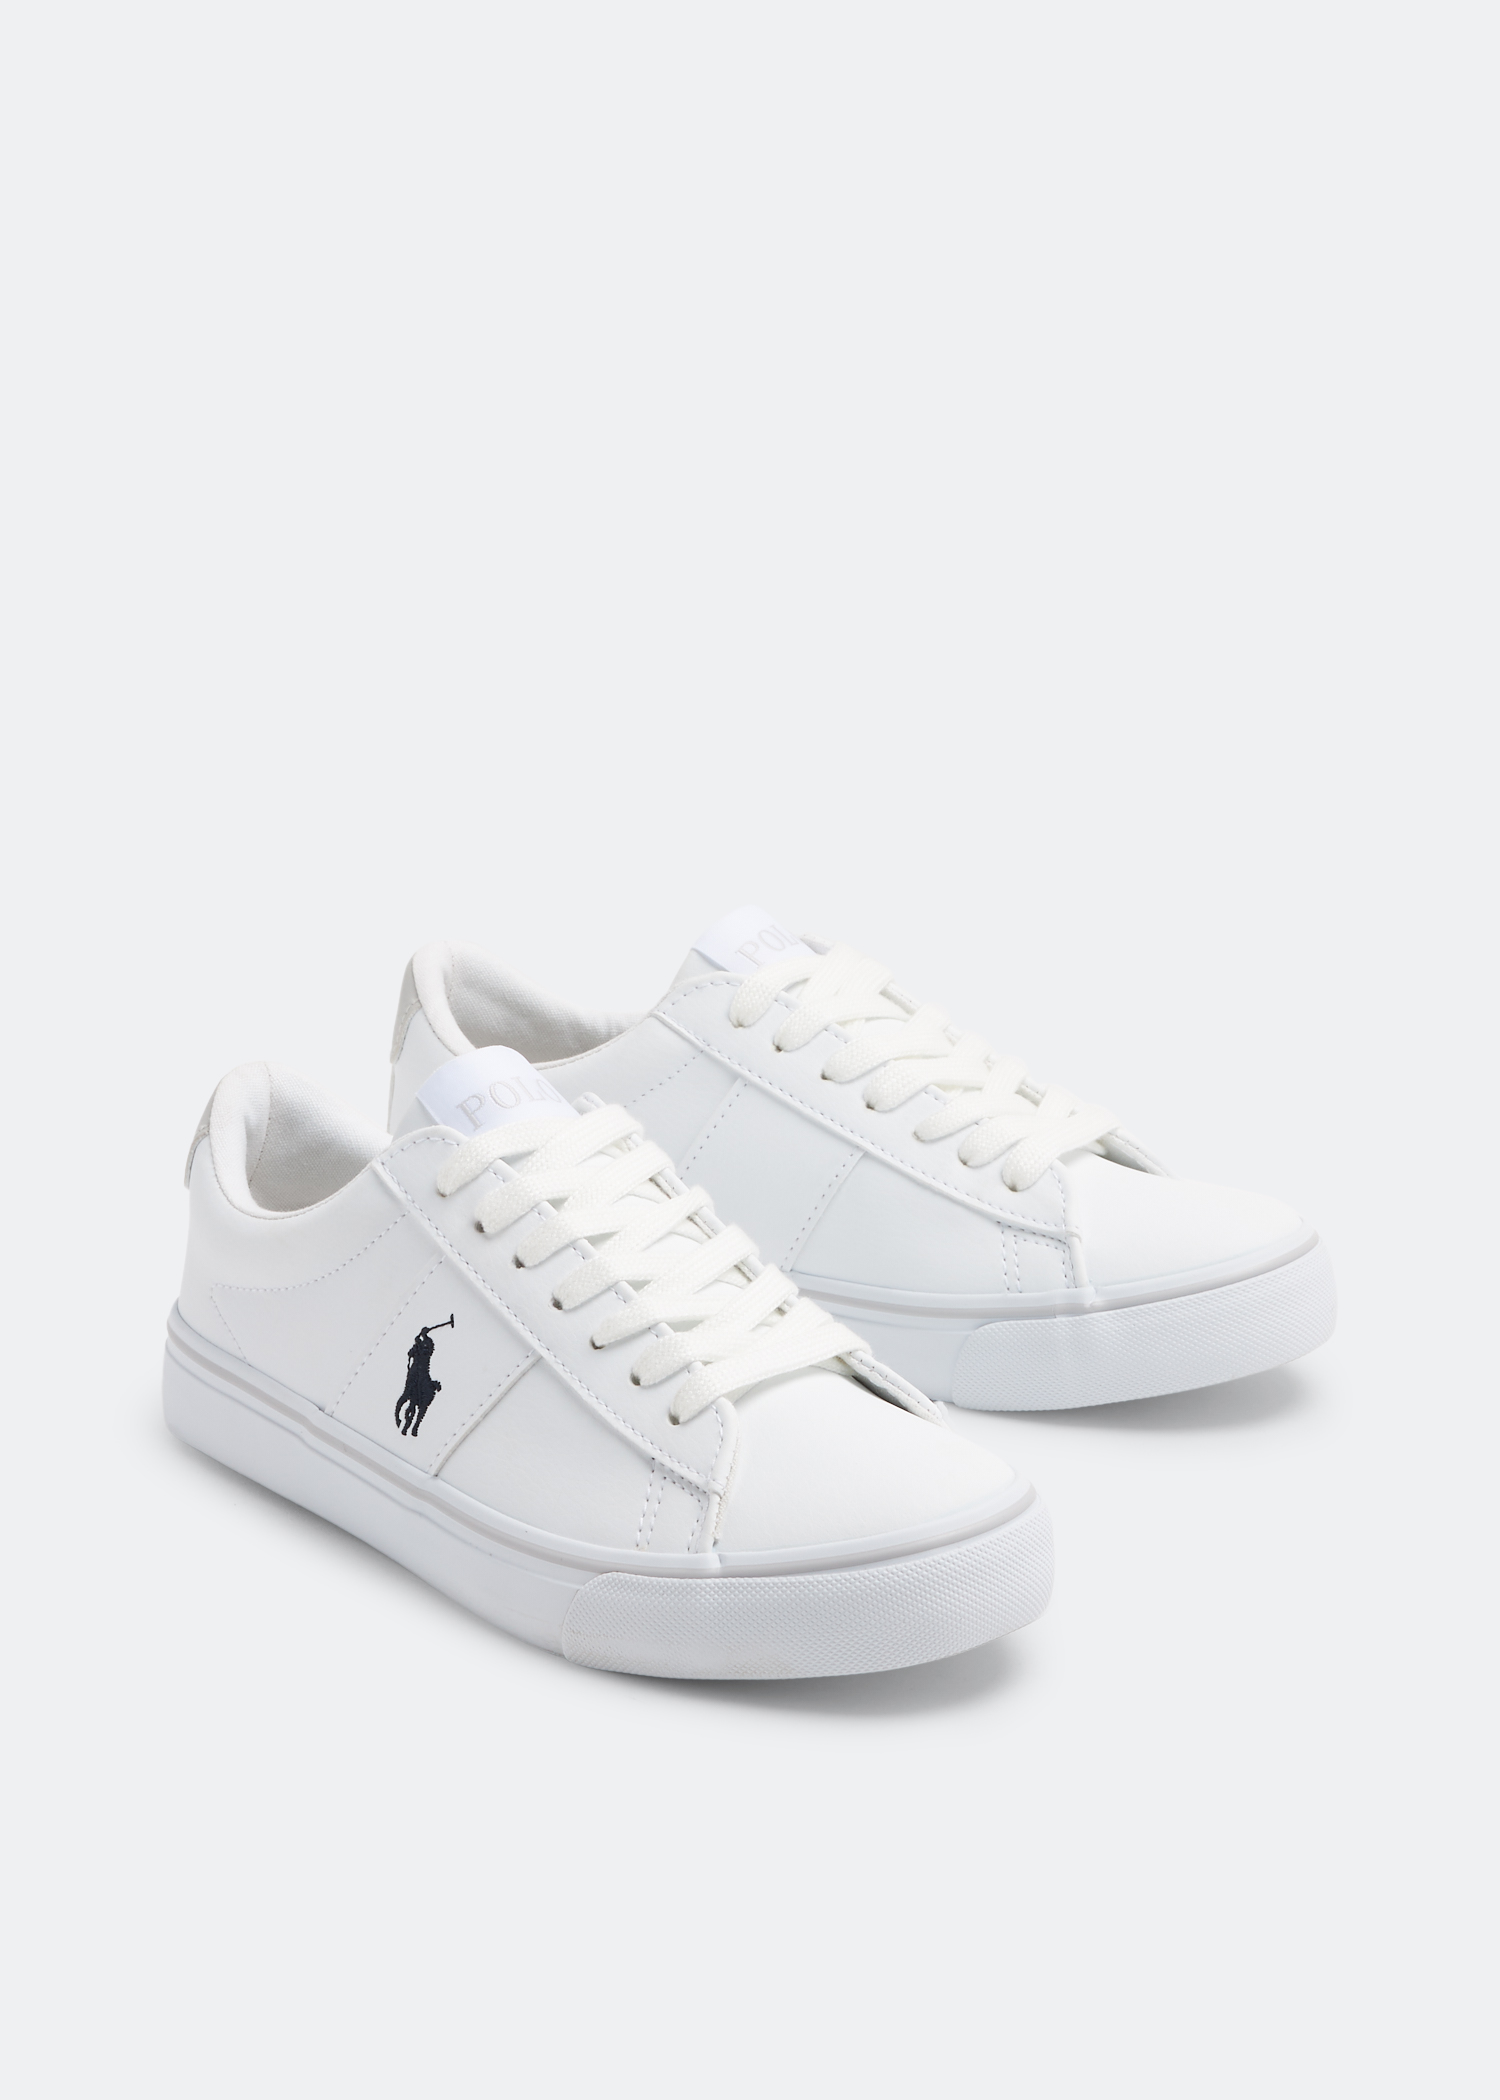 Polo Ralph Lauren Sayer sneakers for Unisex - White in UAE